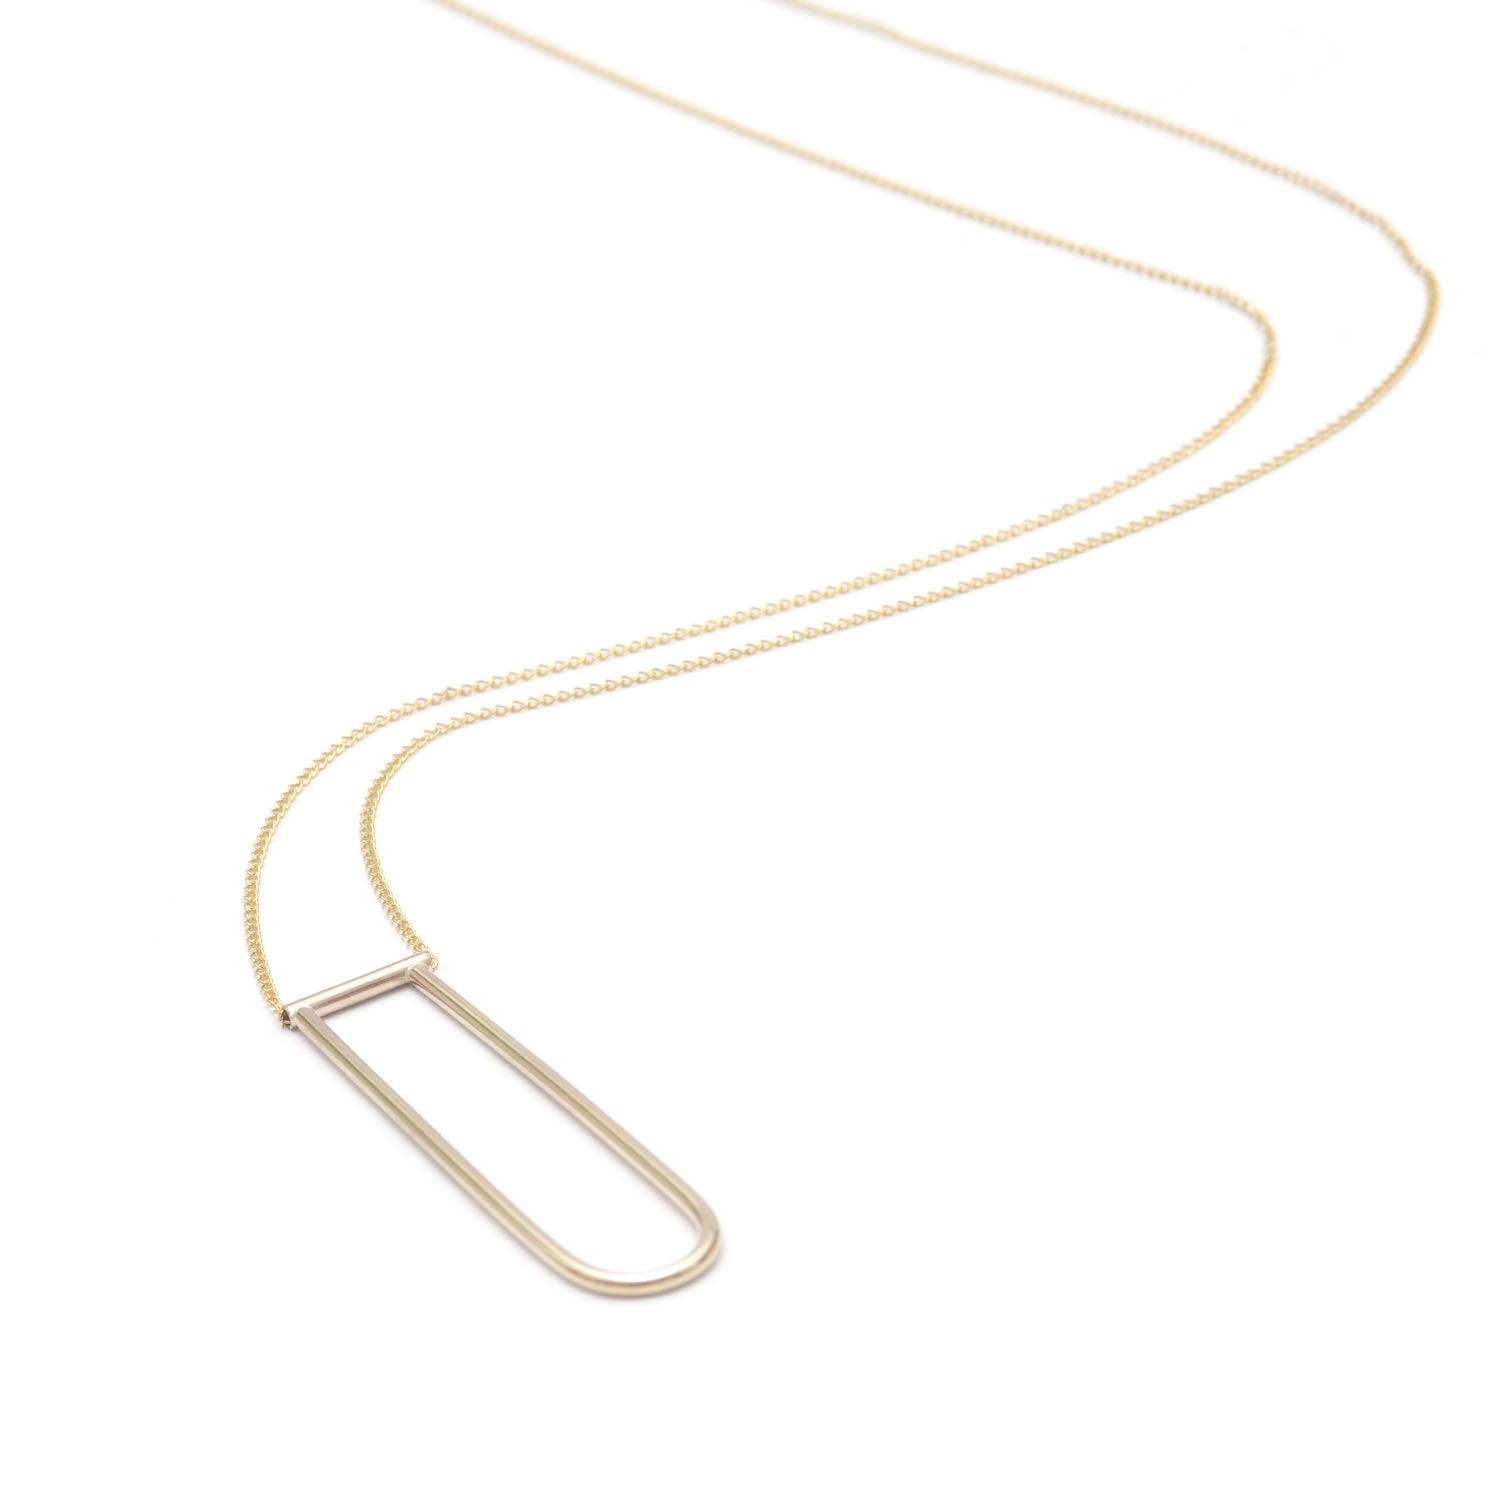 Long, Modern Umbra Necklace - Favor Jewelry